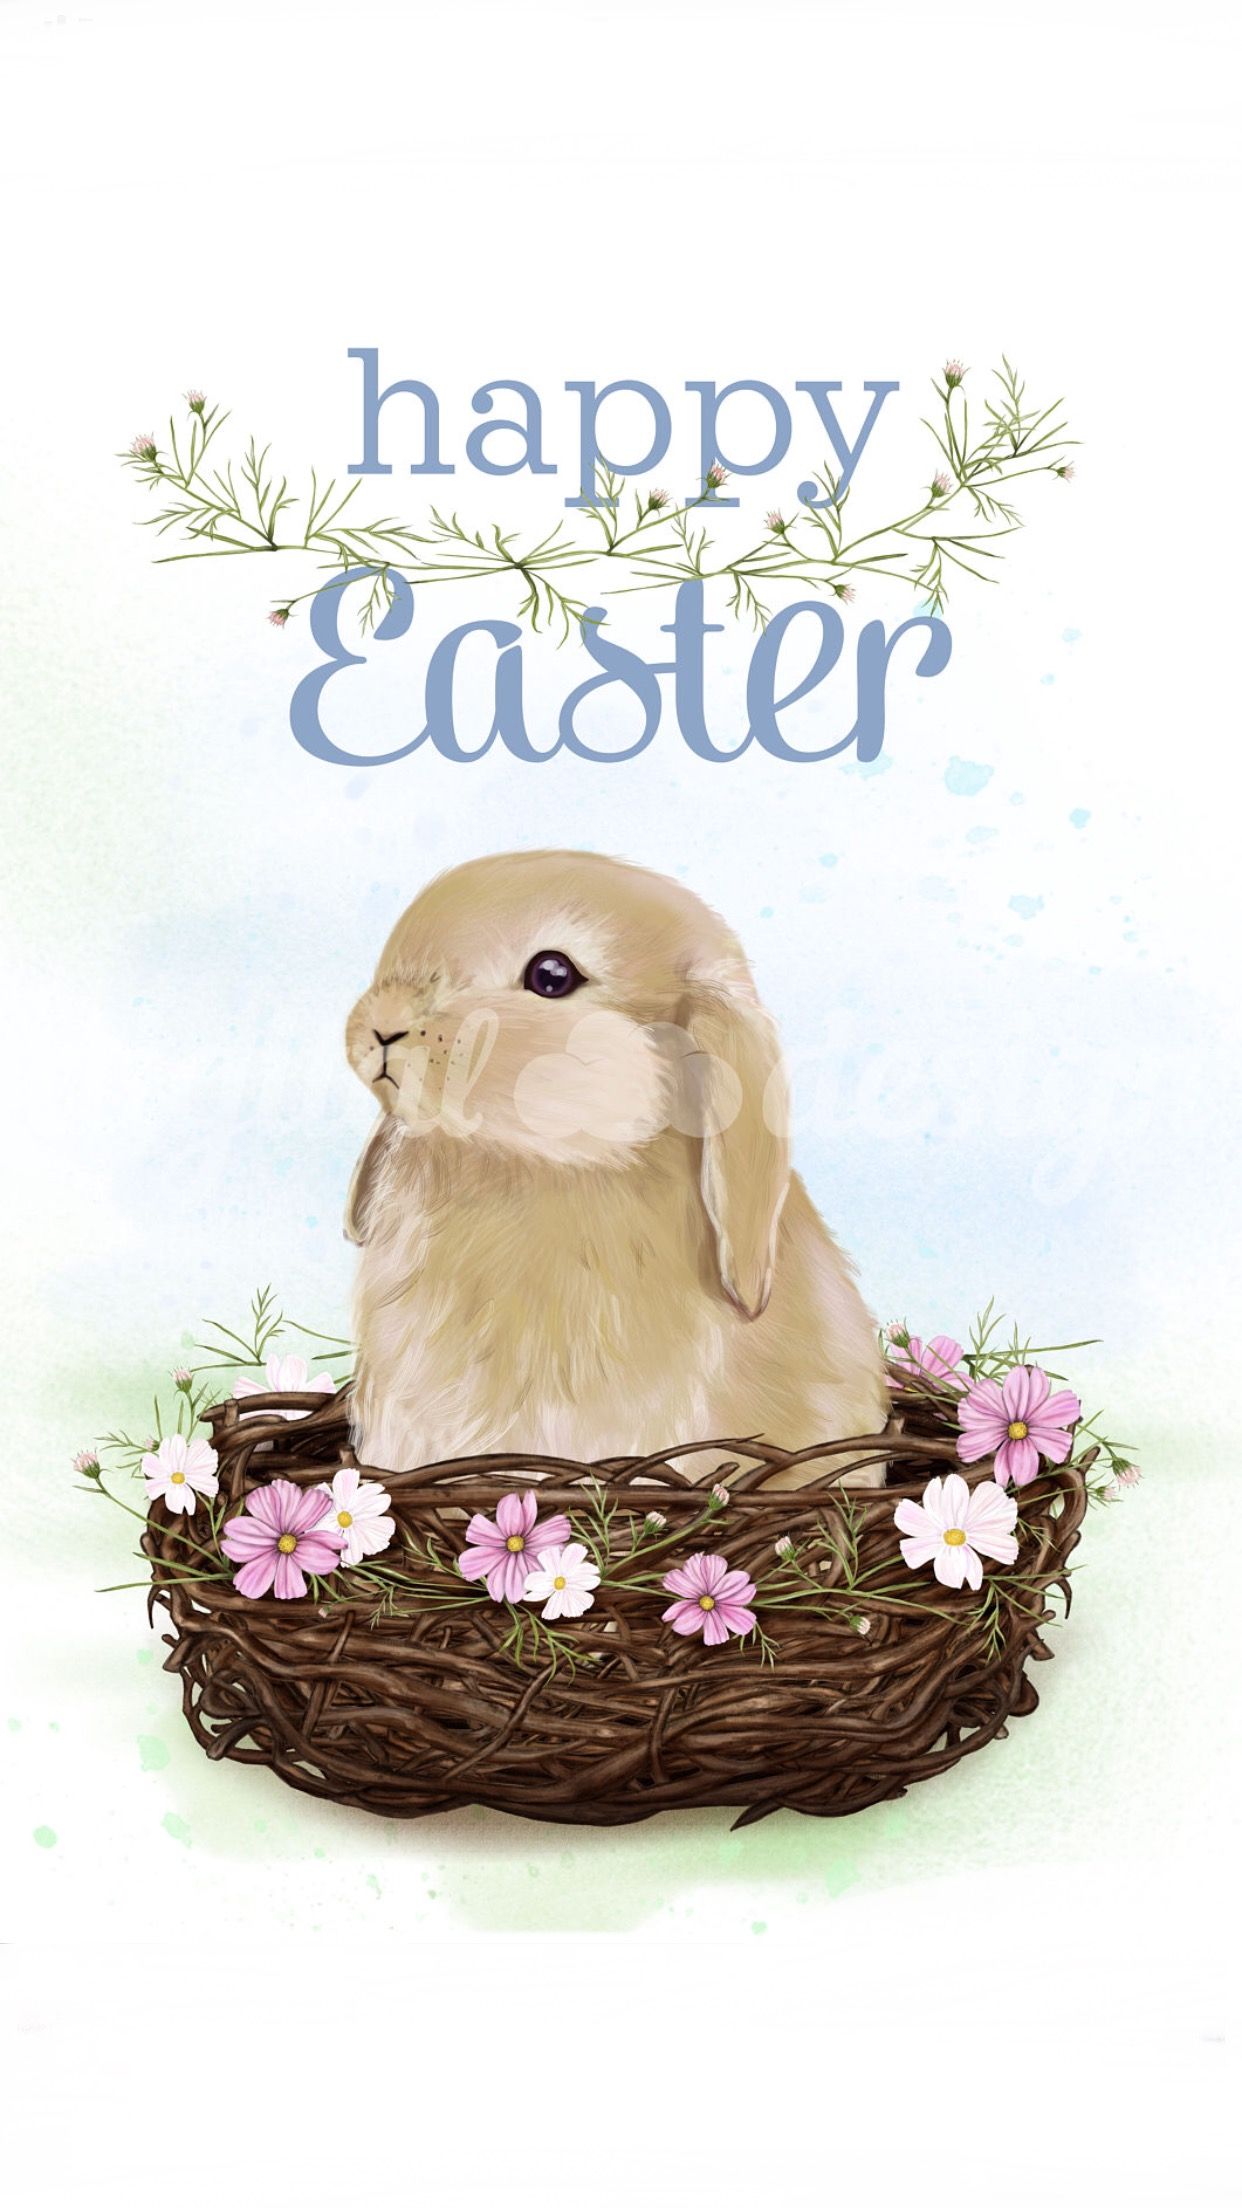 EASTER. Happy easter picture, Easter paintings, Easter wallpaper